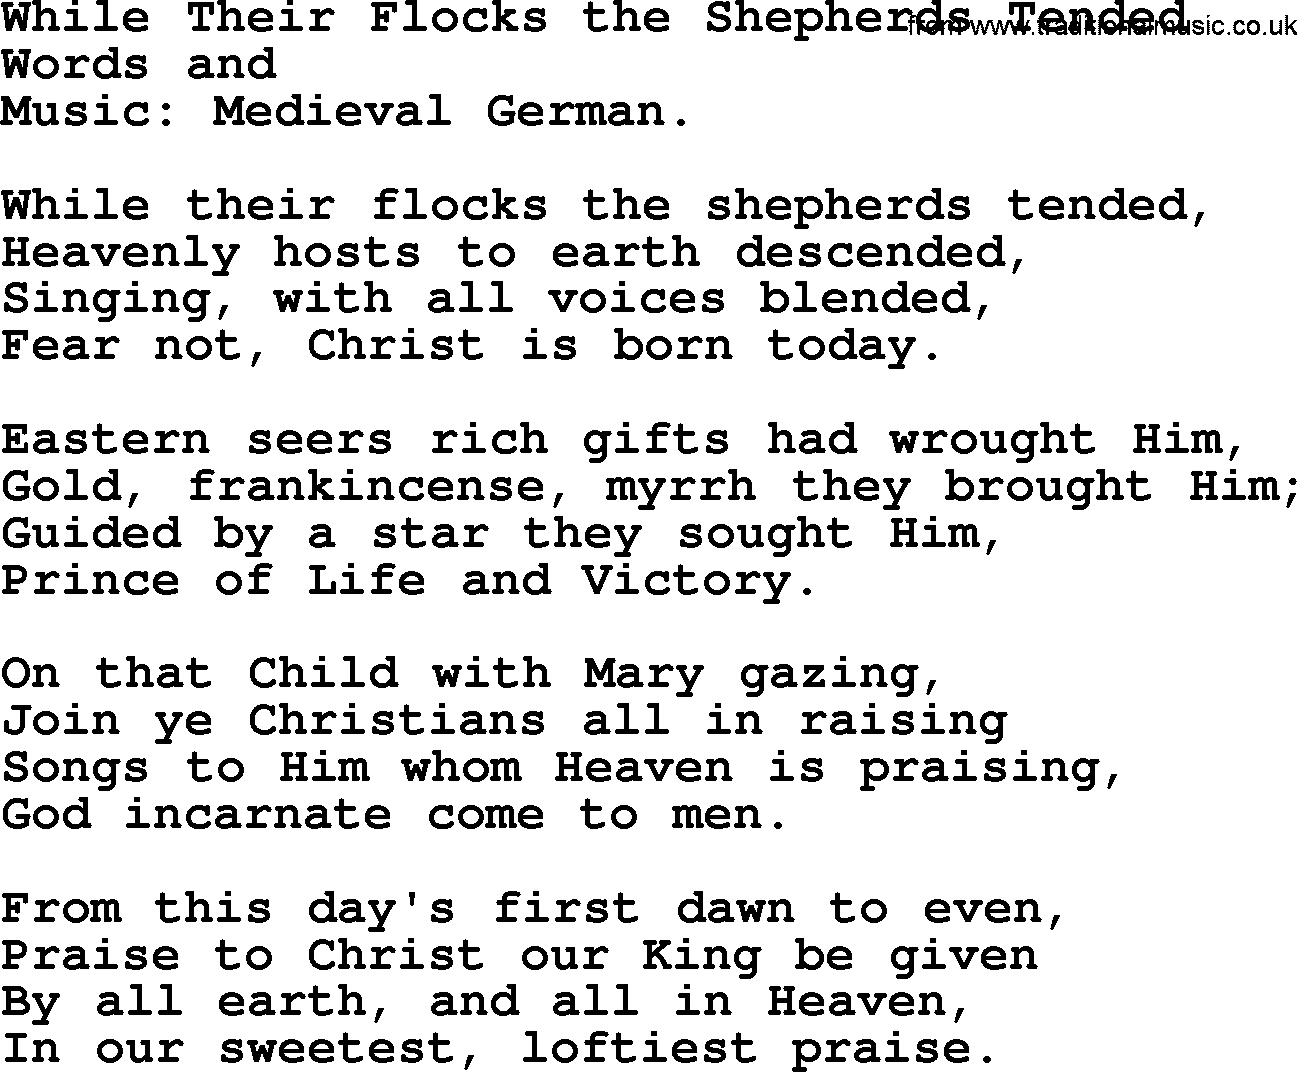 Christmas Hymns, Carols and Songs, title: While Their Flocks The Shepherds Tended, lyrics with PDF